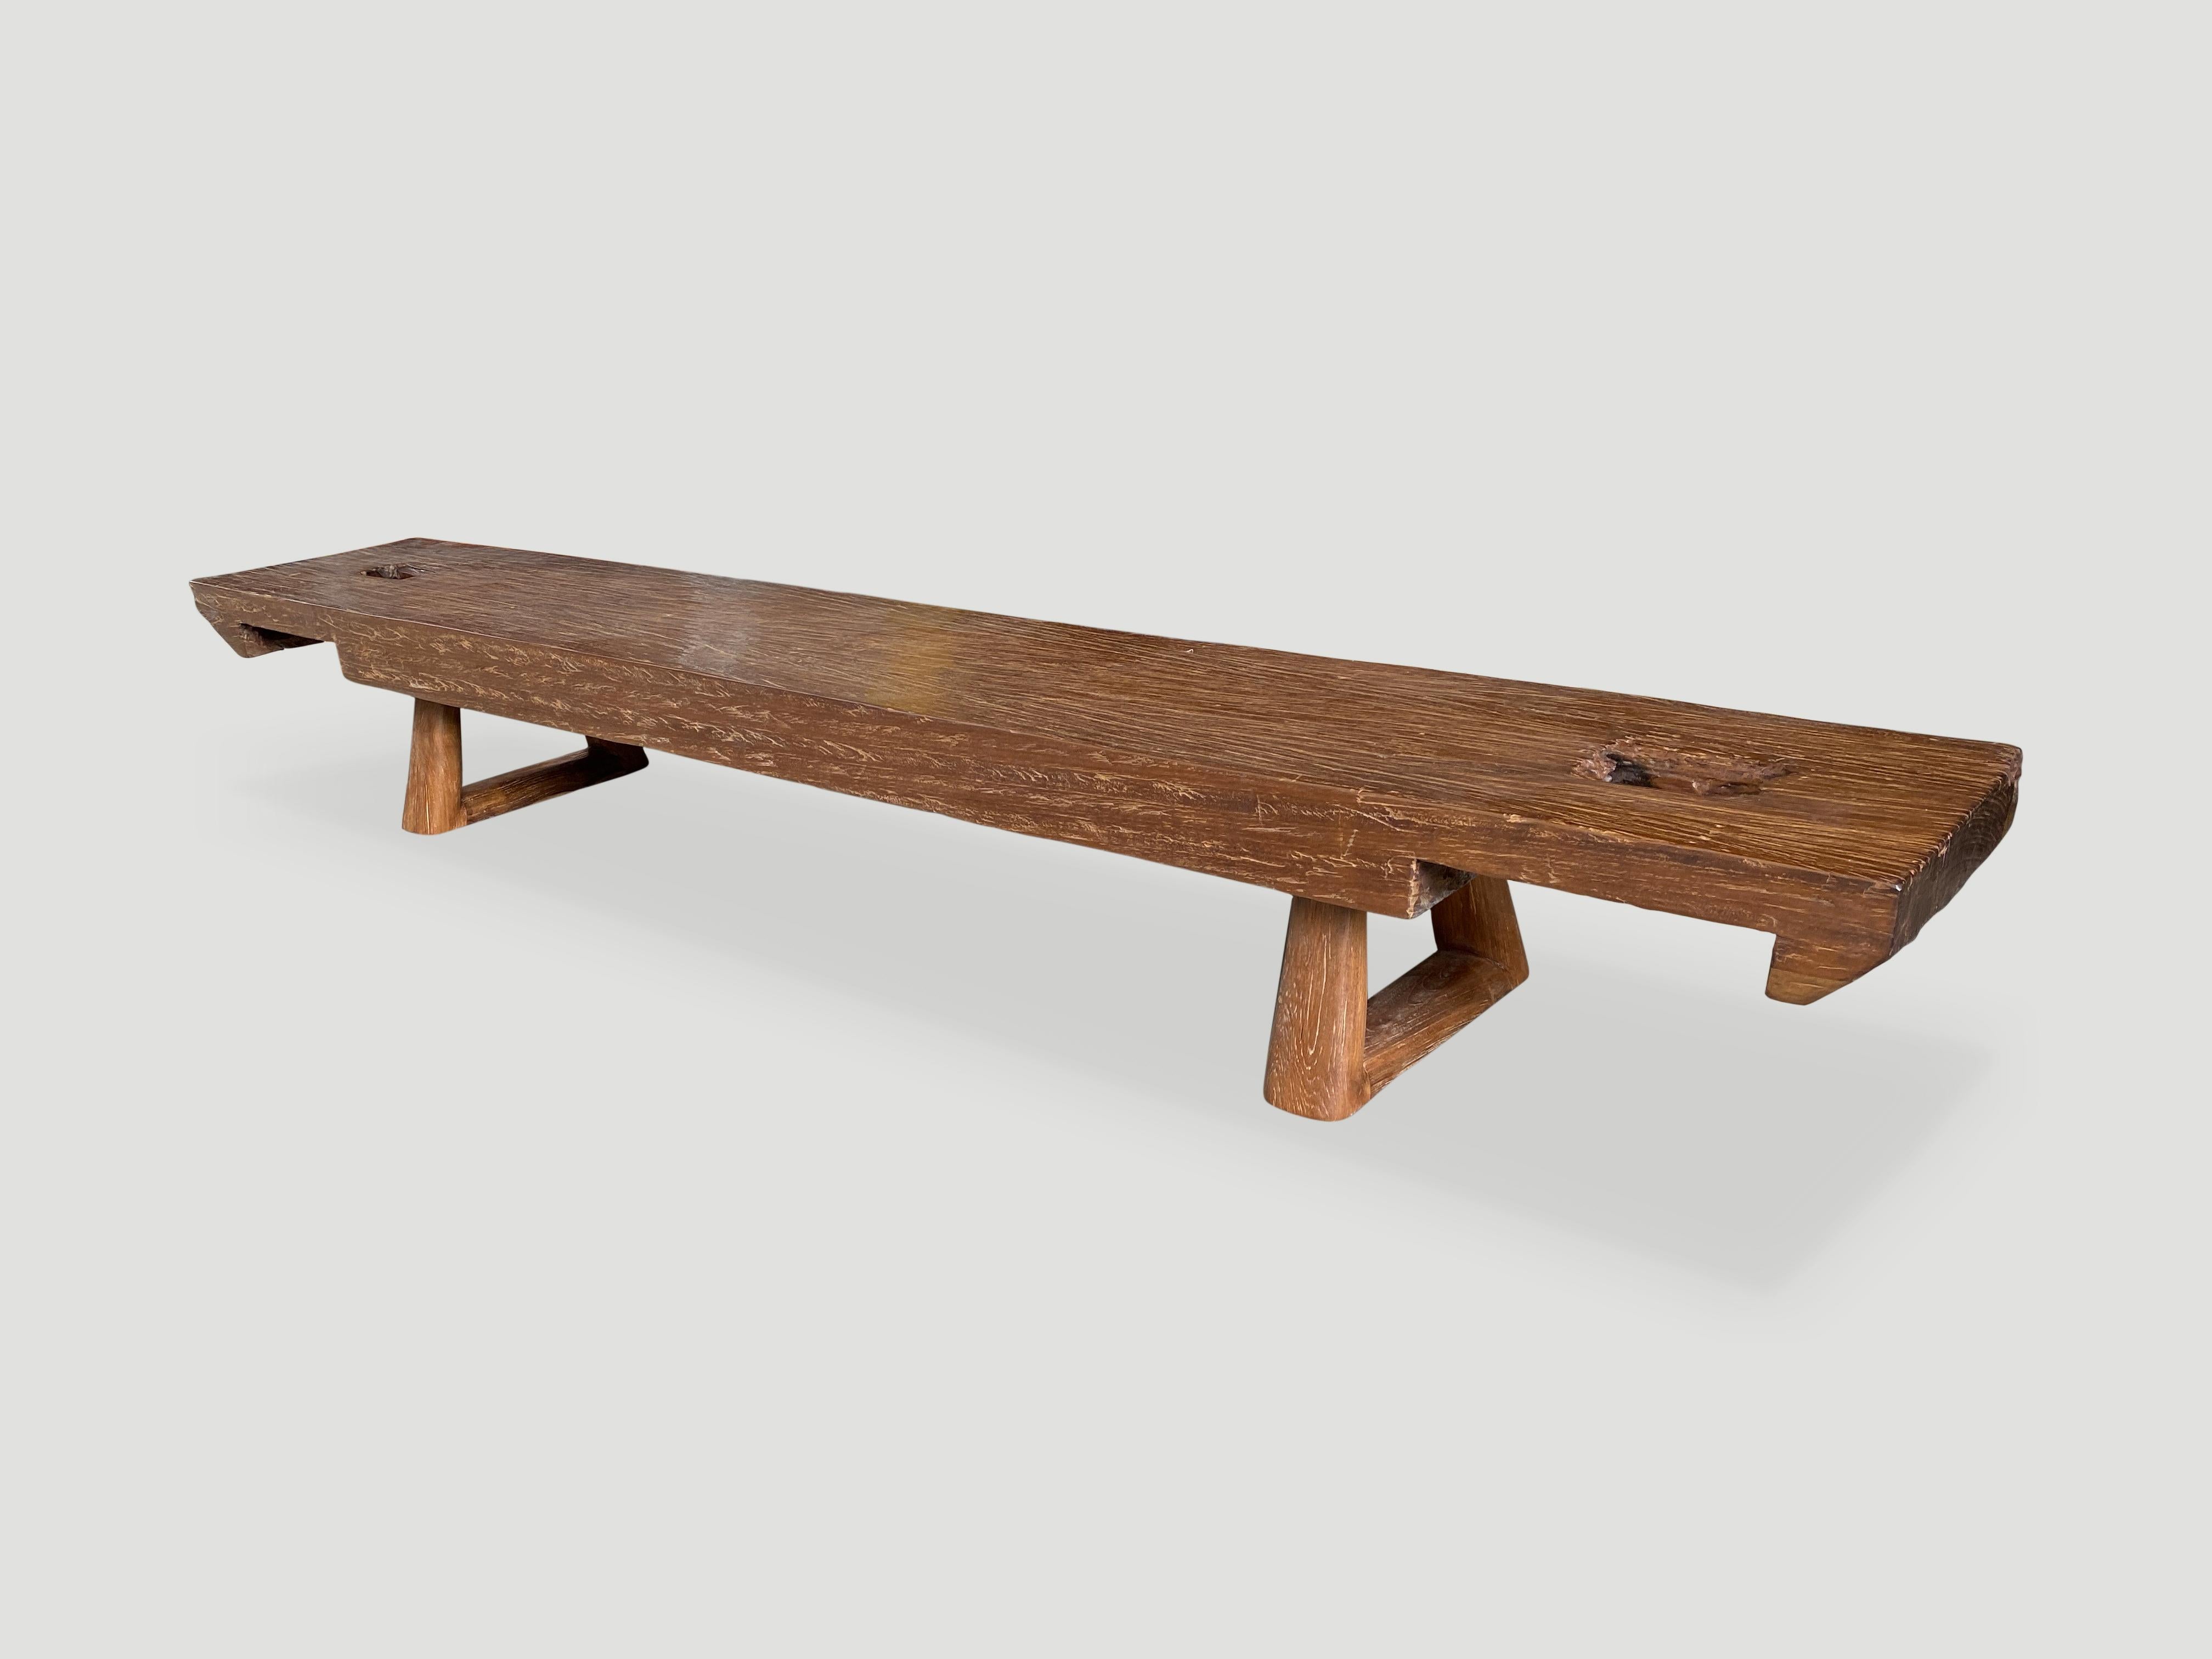 Beautiful single carved teak bench with a five inch thick top. Added triangle style base and cut out ends. A natural oil finish reveals the beautiful wood grain. We have a pair. The price and images reflect the one shown.

Own an Andrianna